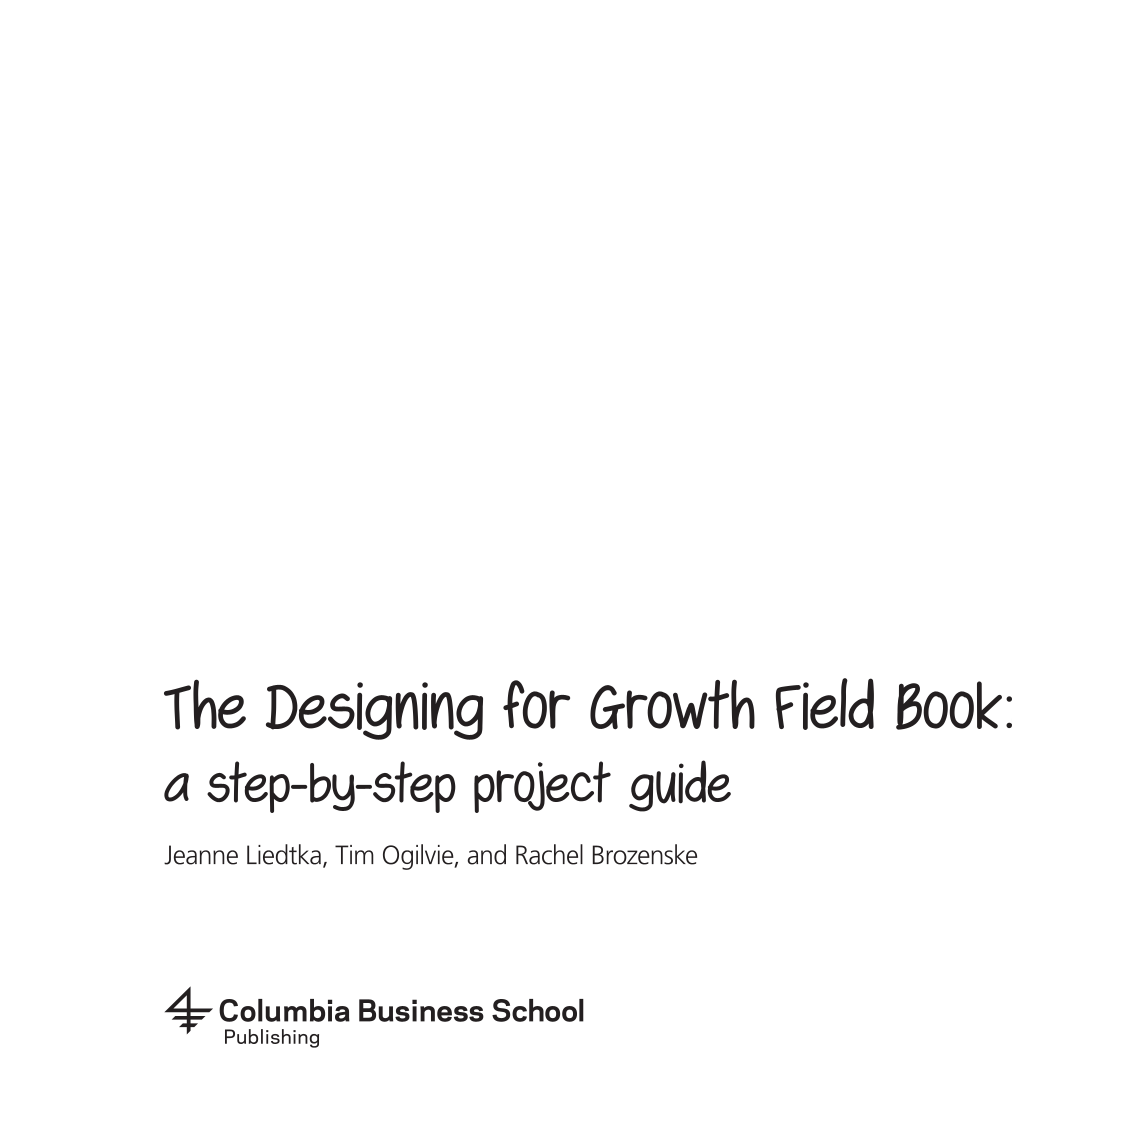 The Designing for Growth Field Book page iii